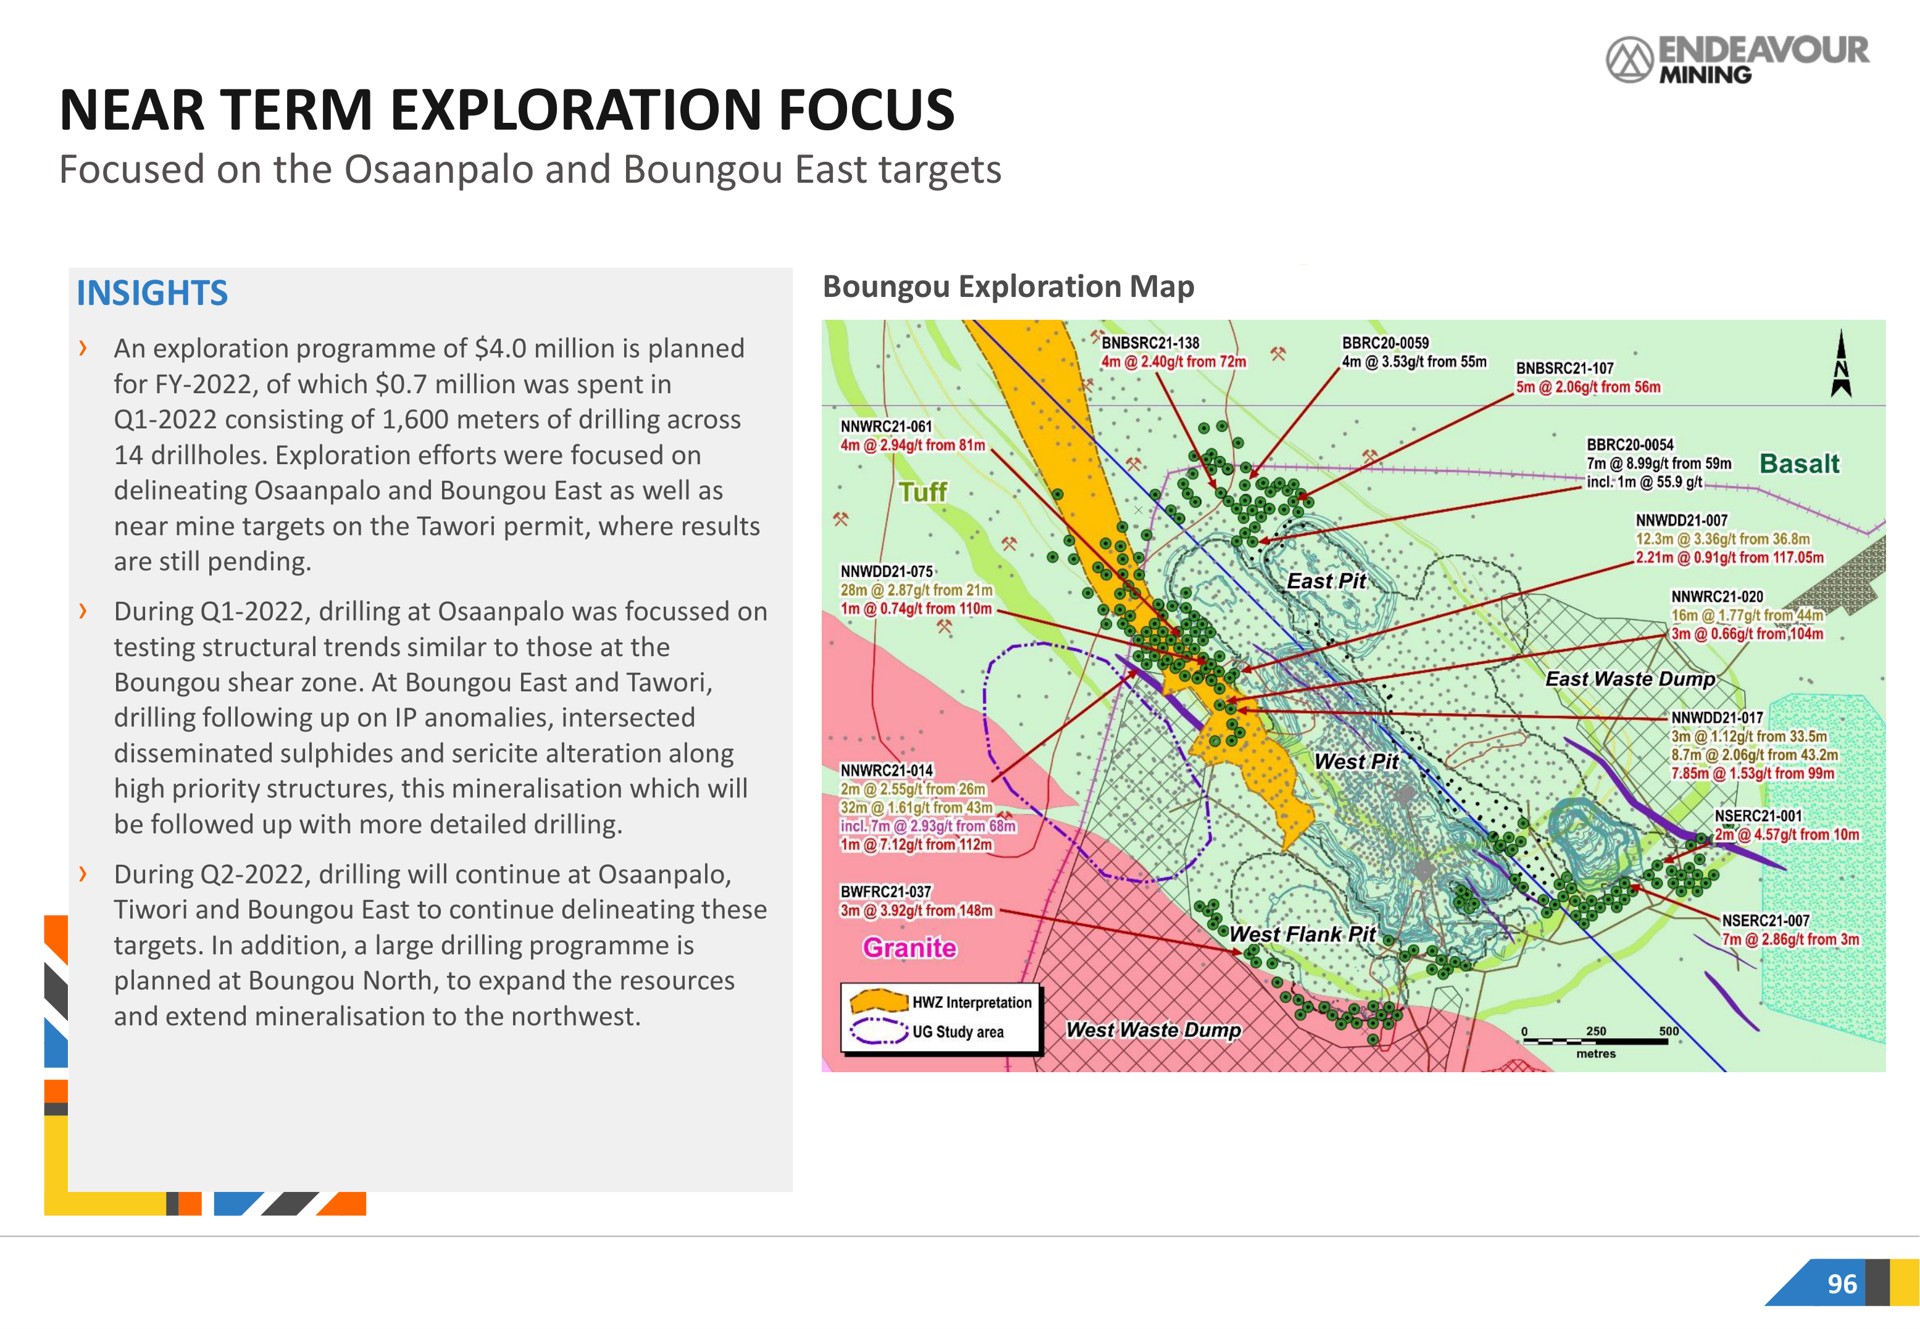 near term exploration focus focused on the and east targets | Endeavour Mining